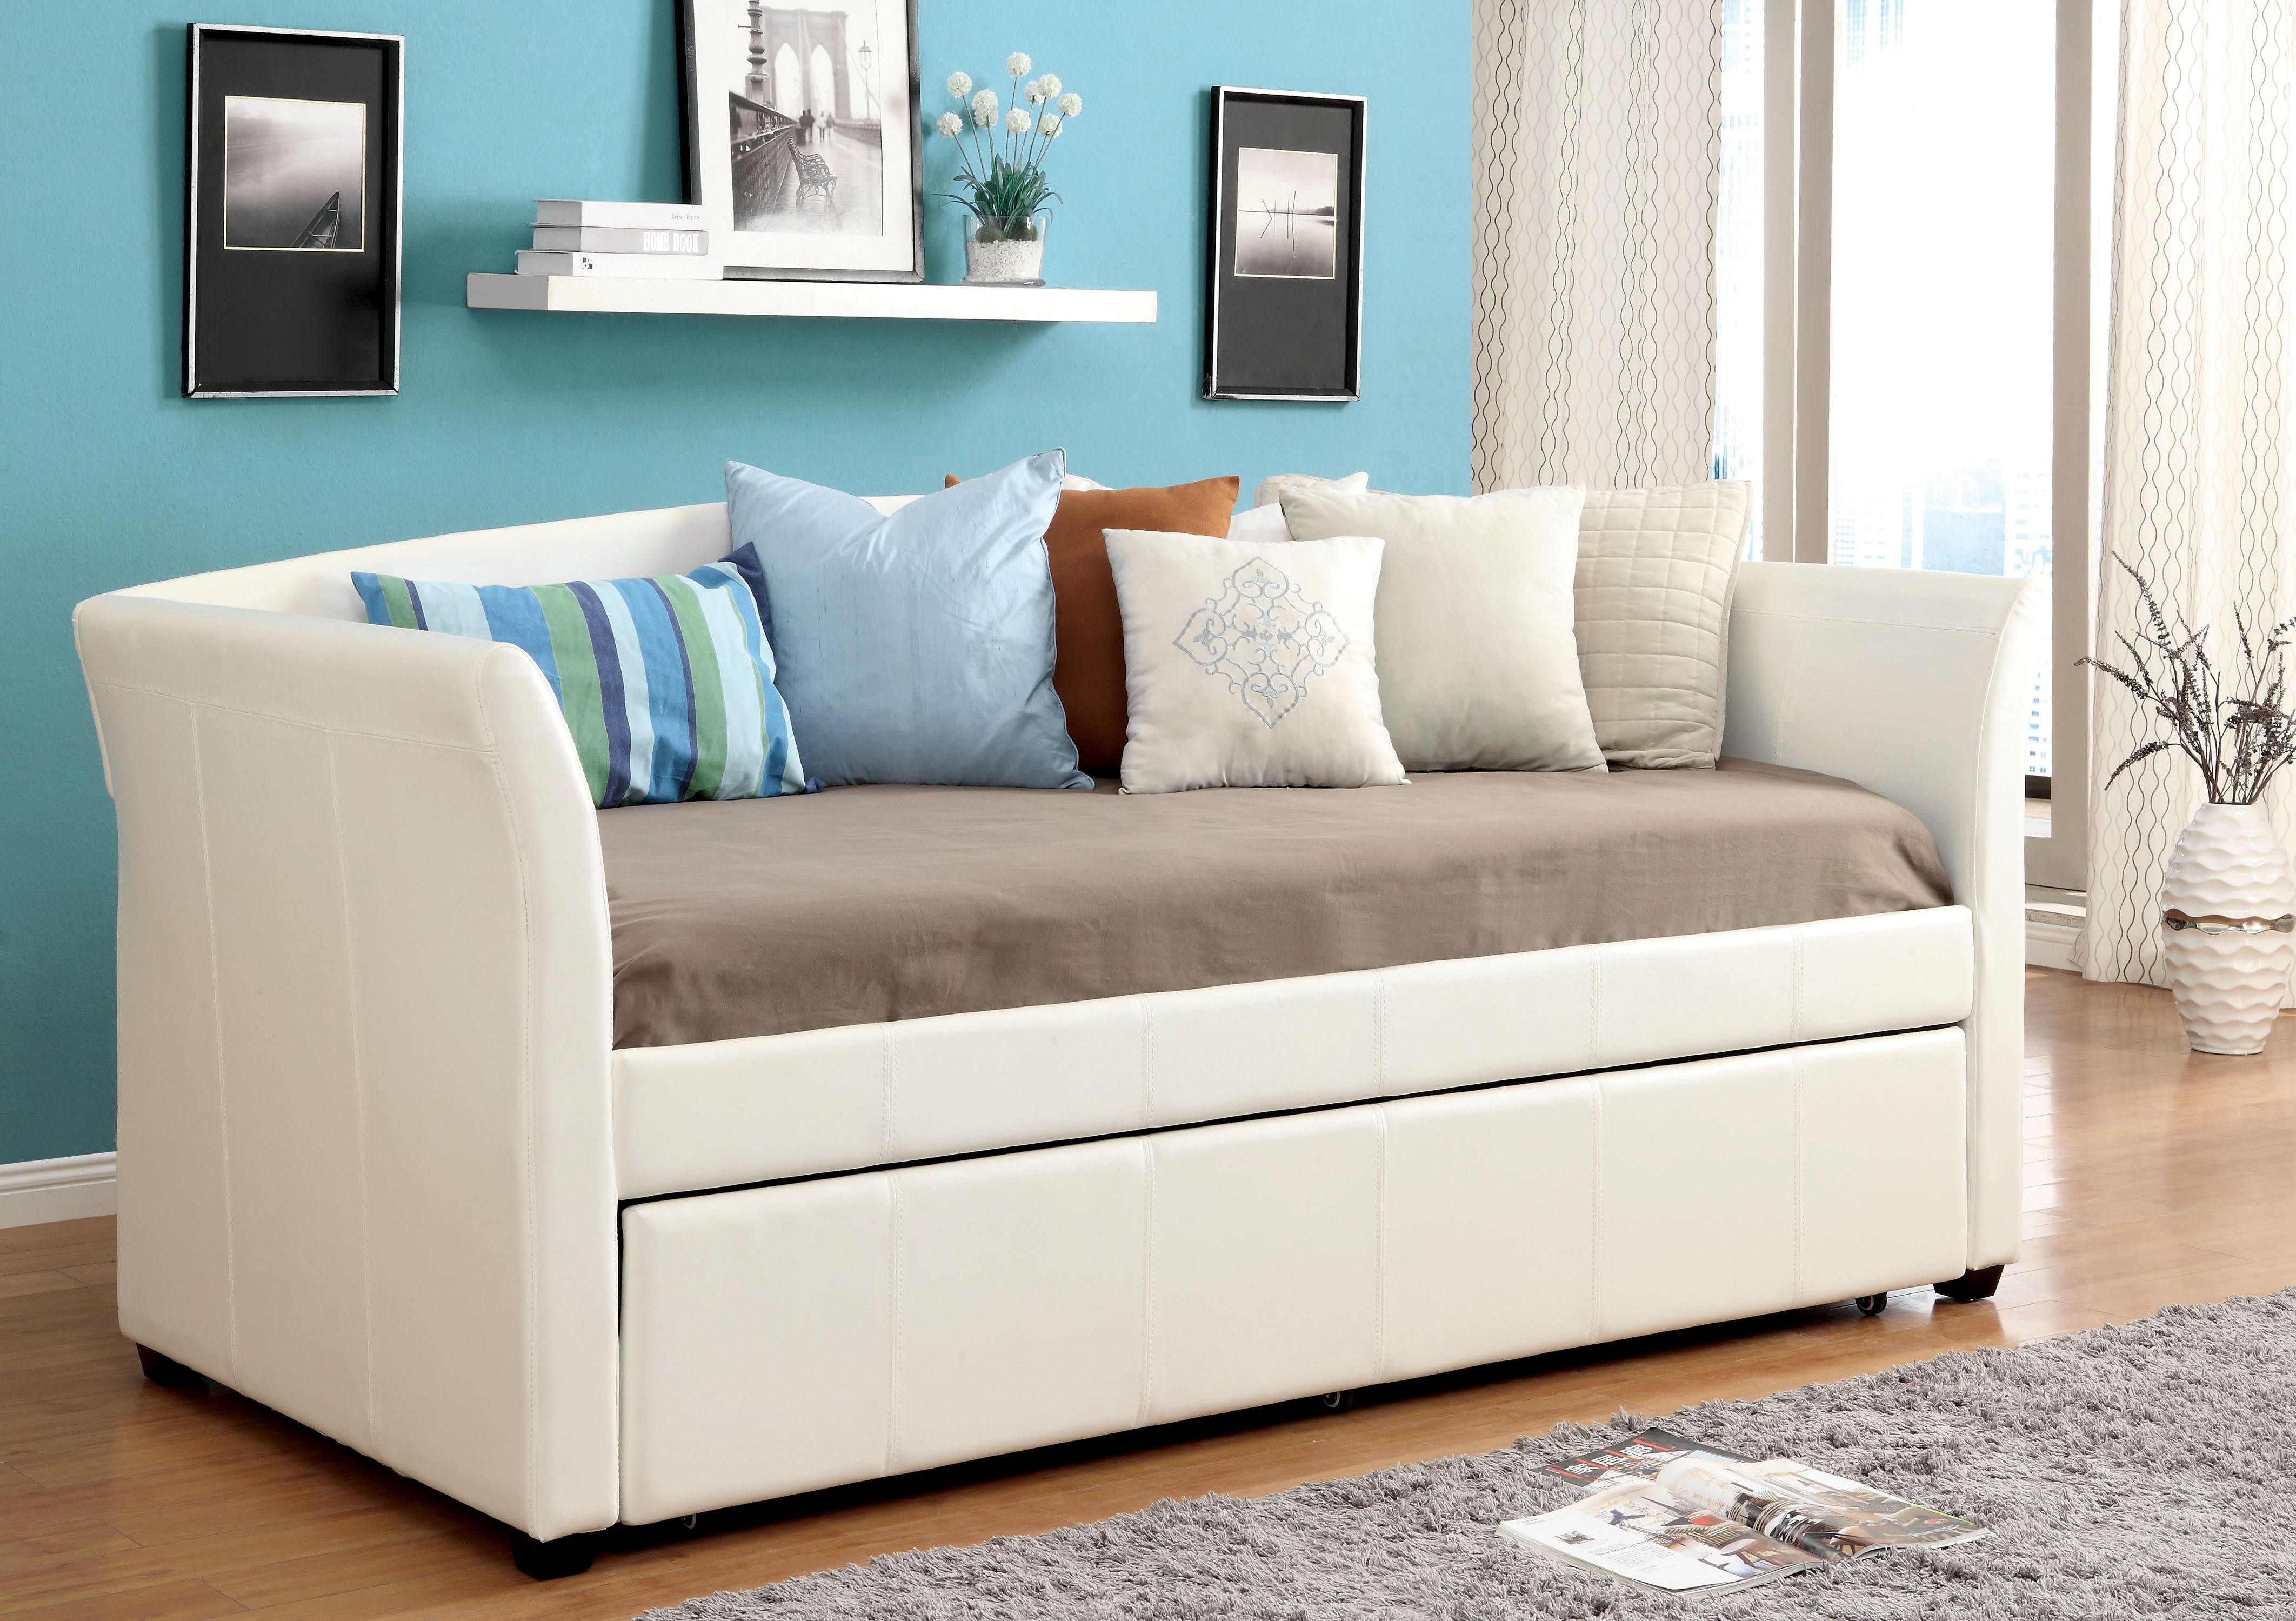 Furniture of America Jeanie Wood Daybed with Trundle, Twin, White - image 2 of 2